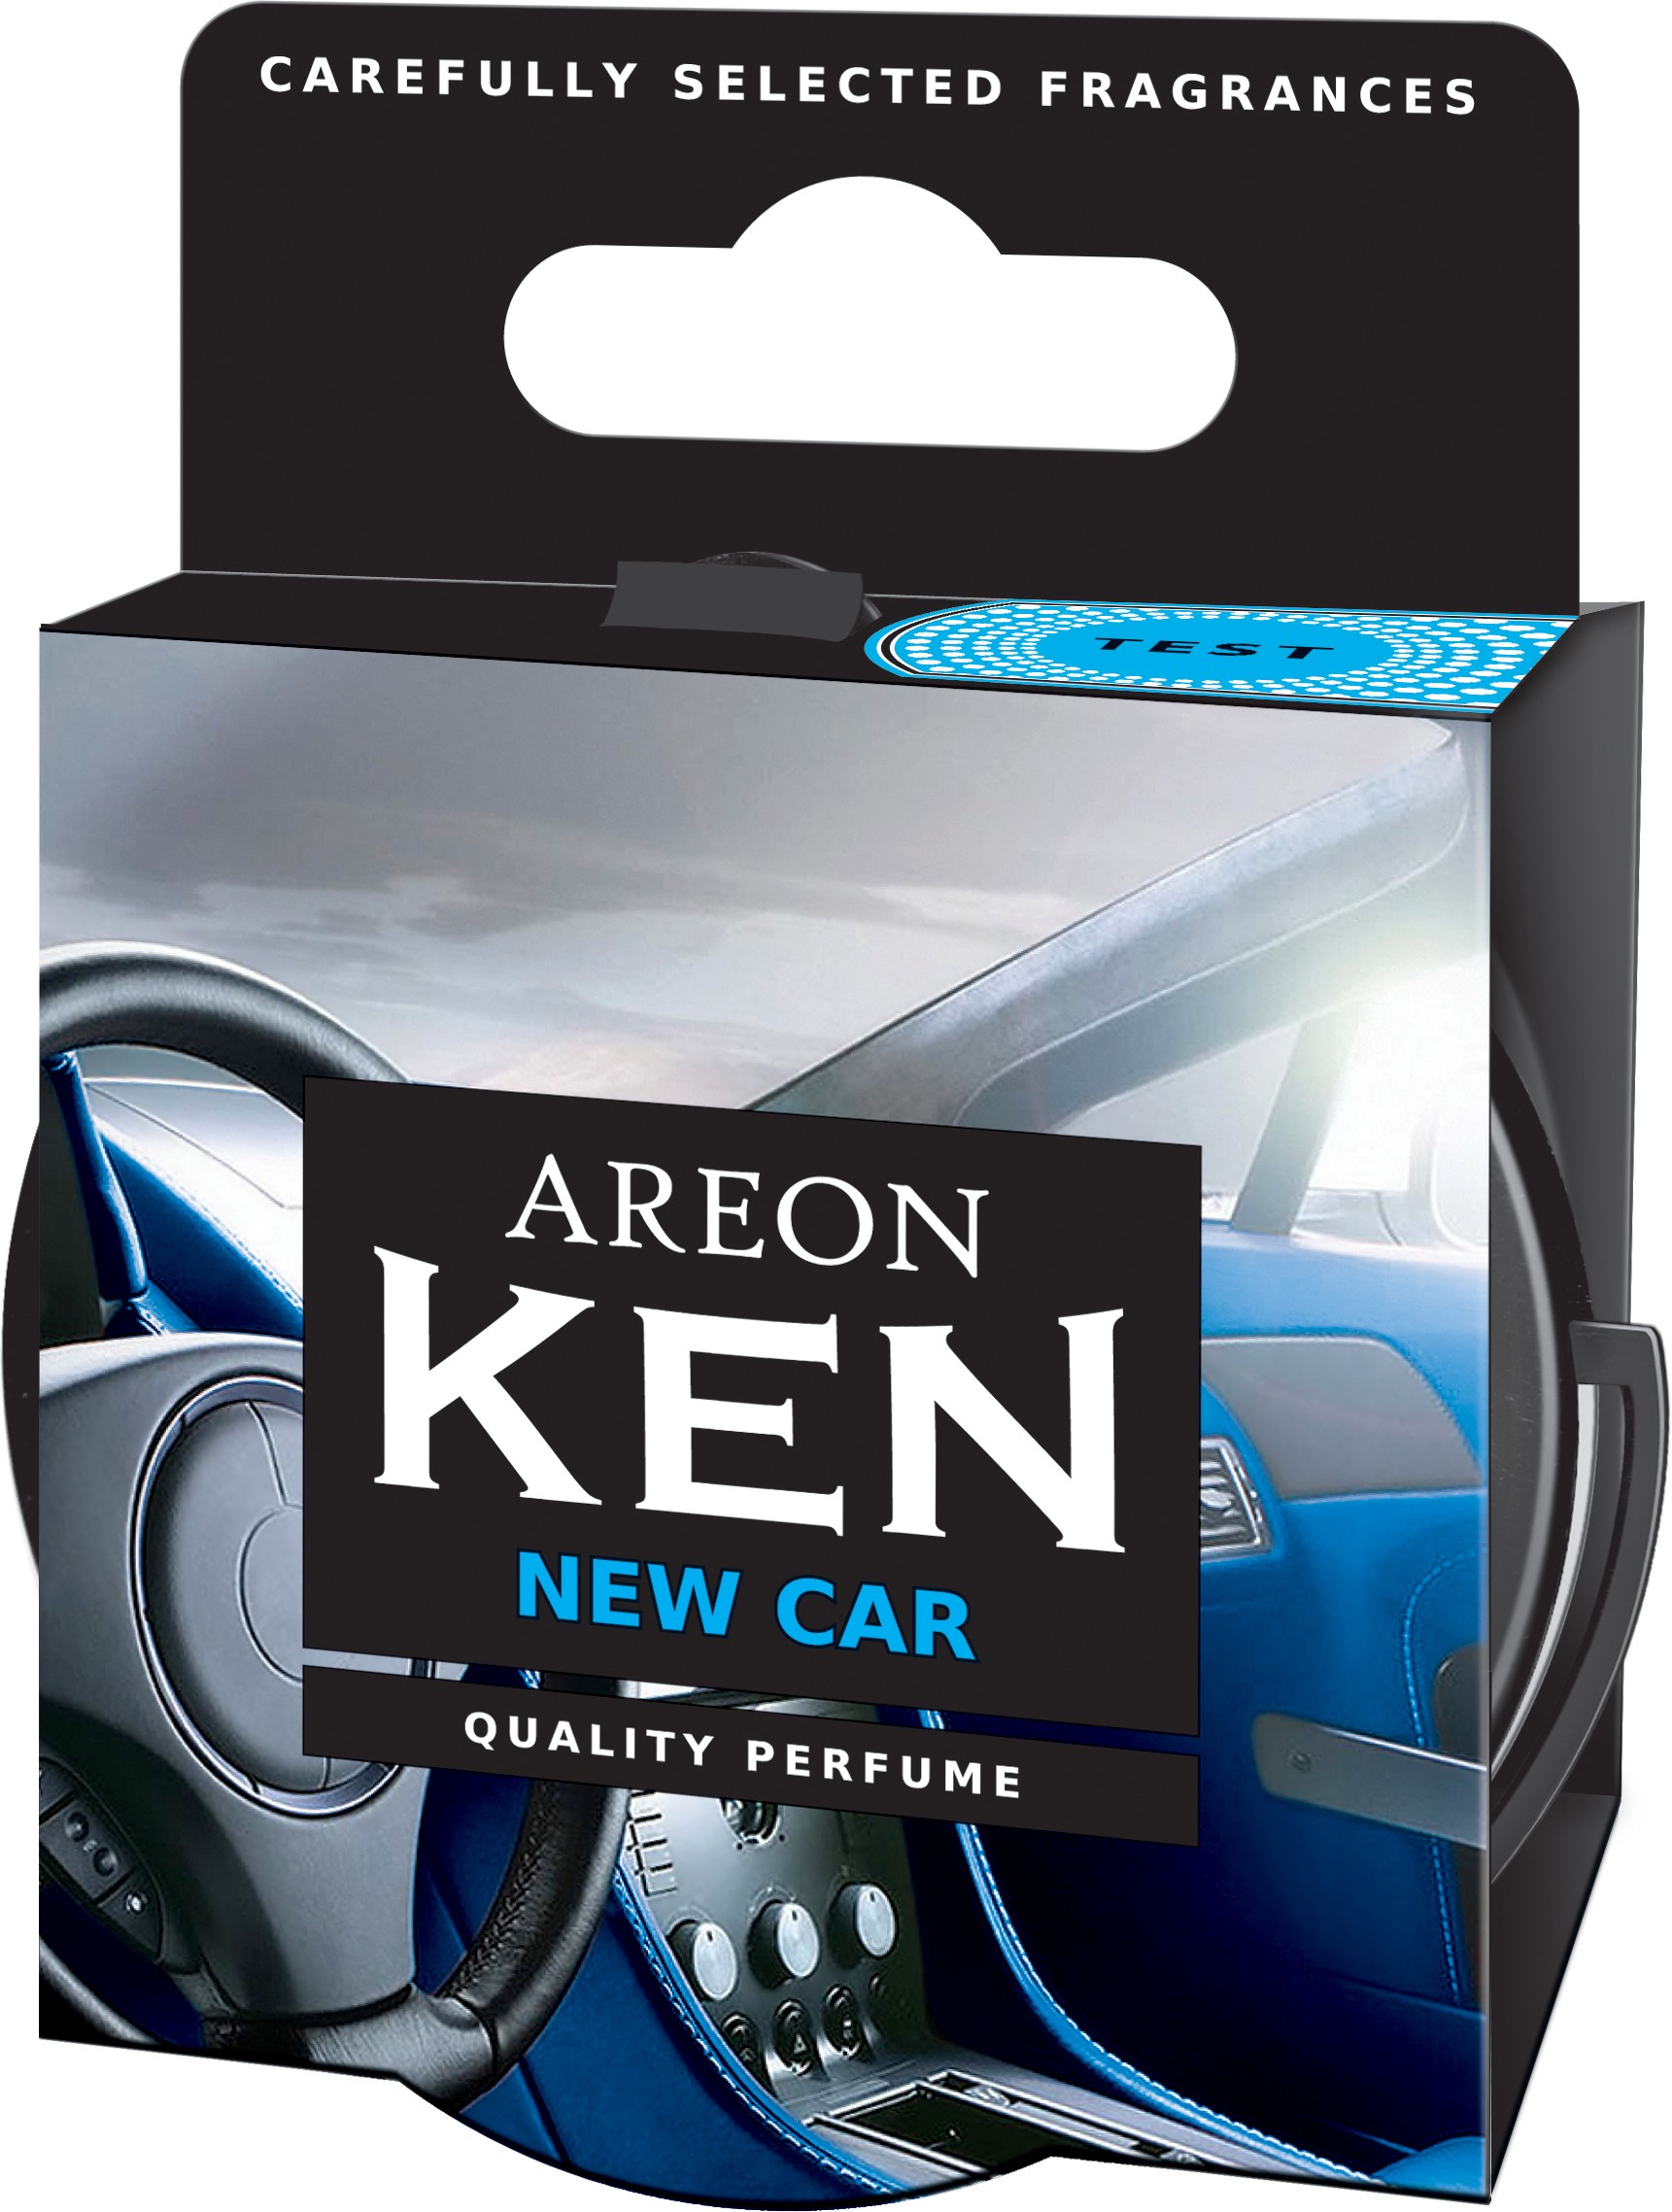 Original Areon Ken Car Scent Container Air Freshener Lid New Car New Cars